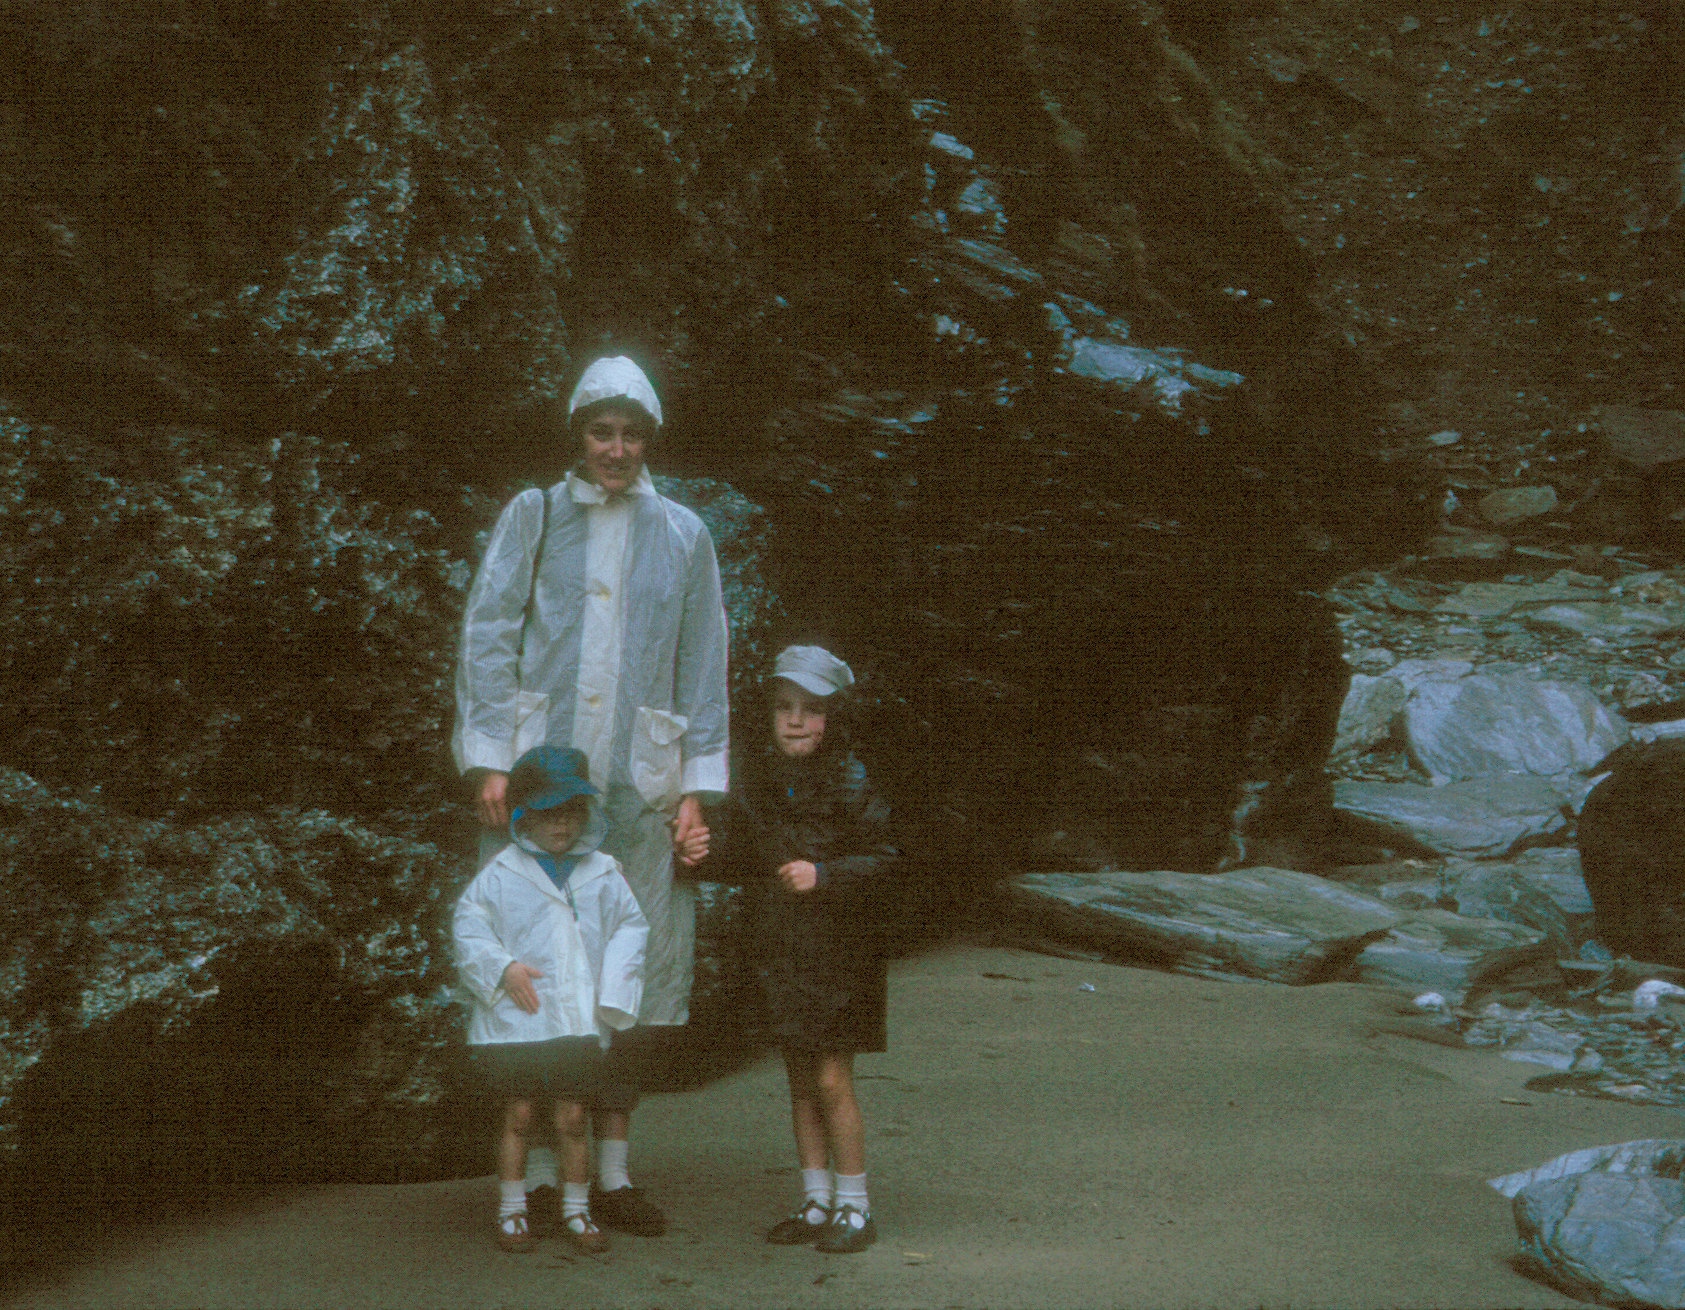 6801705k May 1968 - Our trip to Tintagel was spoilt by rain! Betty, Simon and Jonathan on the beach.